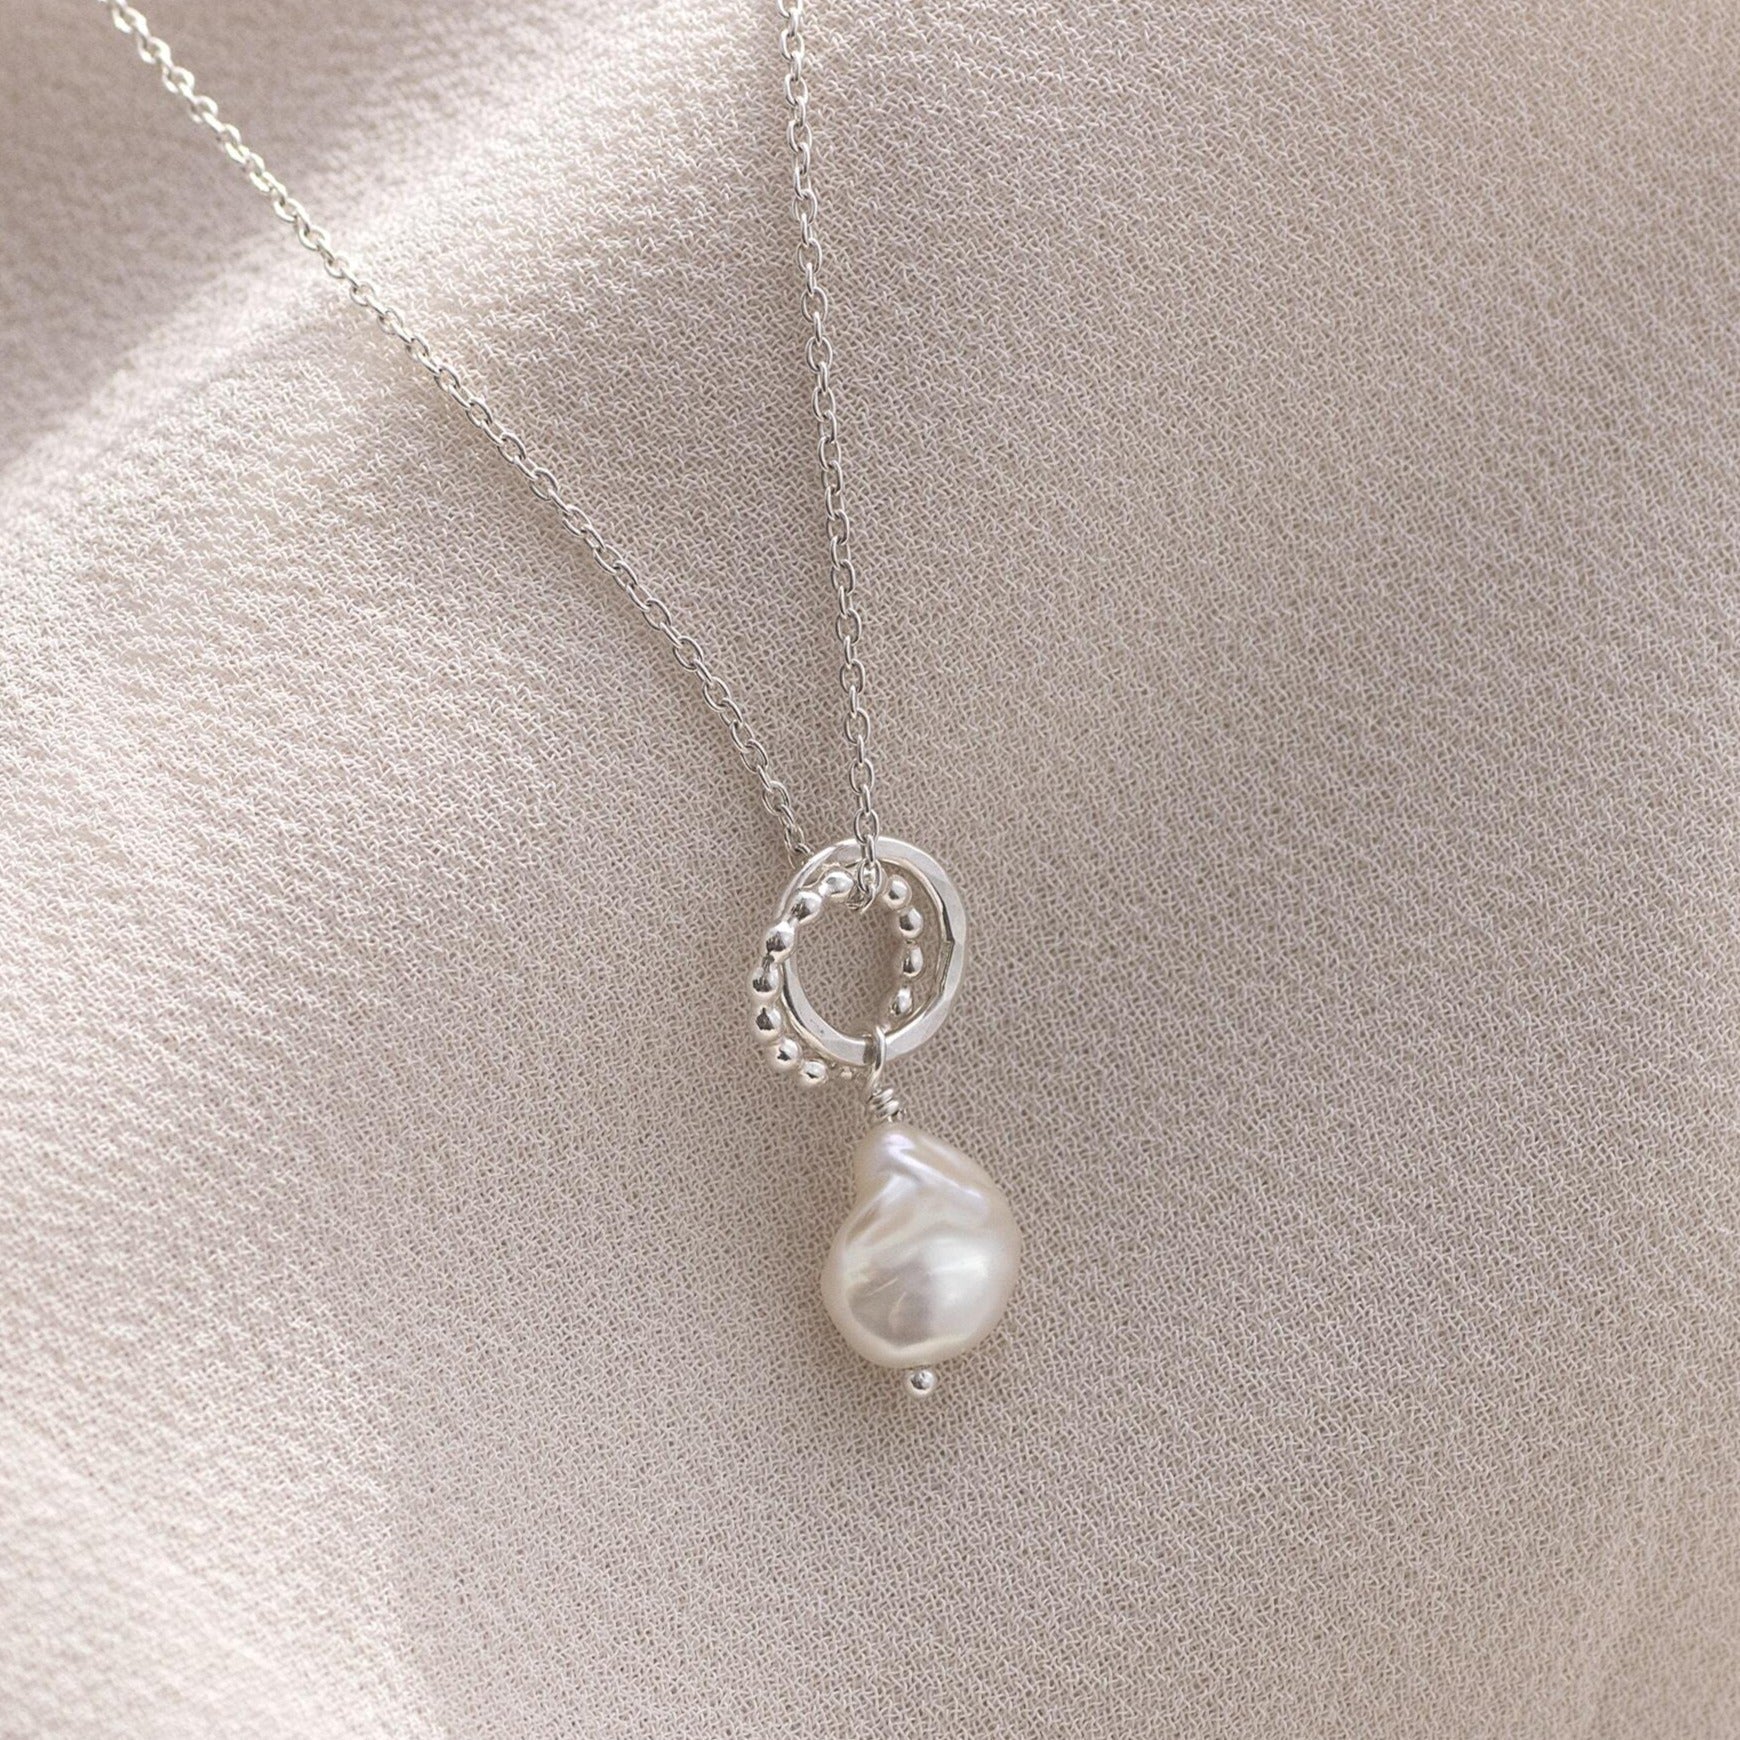 Elegant White Pearl Necklace | The Perfect Gift for Mothers & Brides 16 inch / with Standard Gift Box